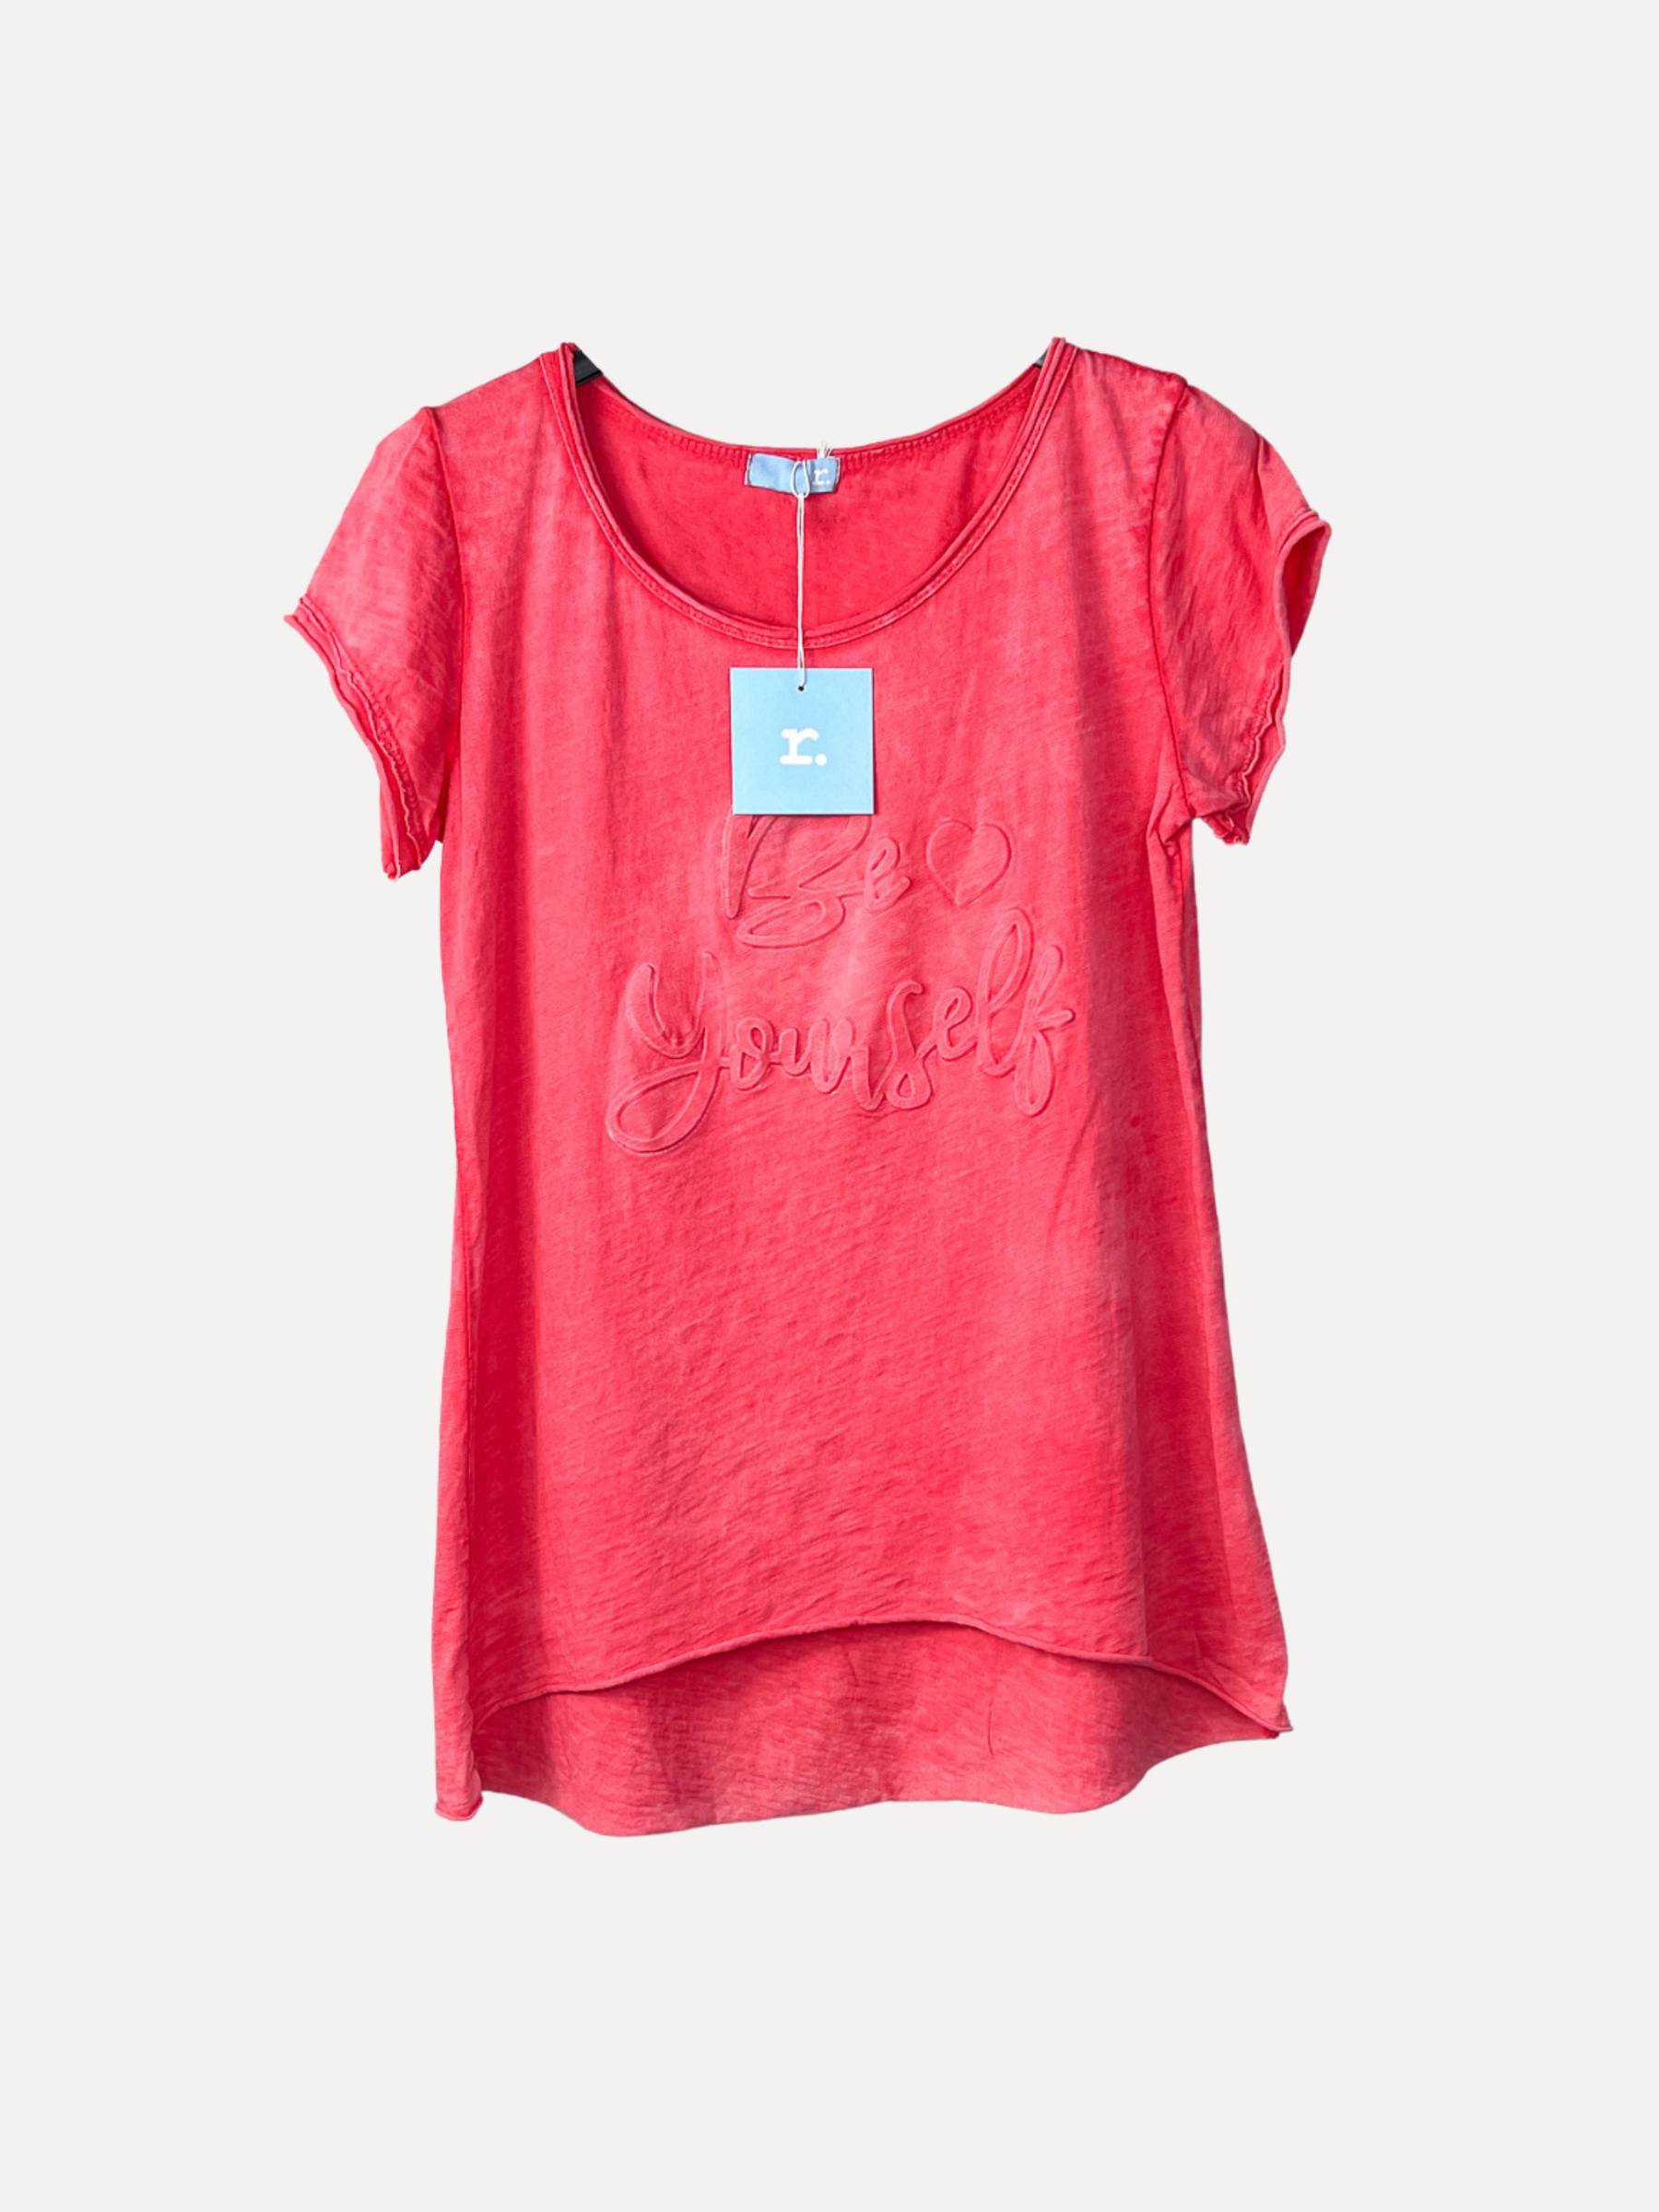 BE YOURSELF T-Shirt, Raspberry